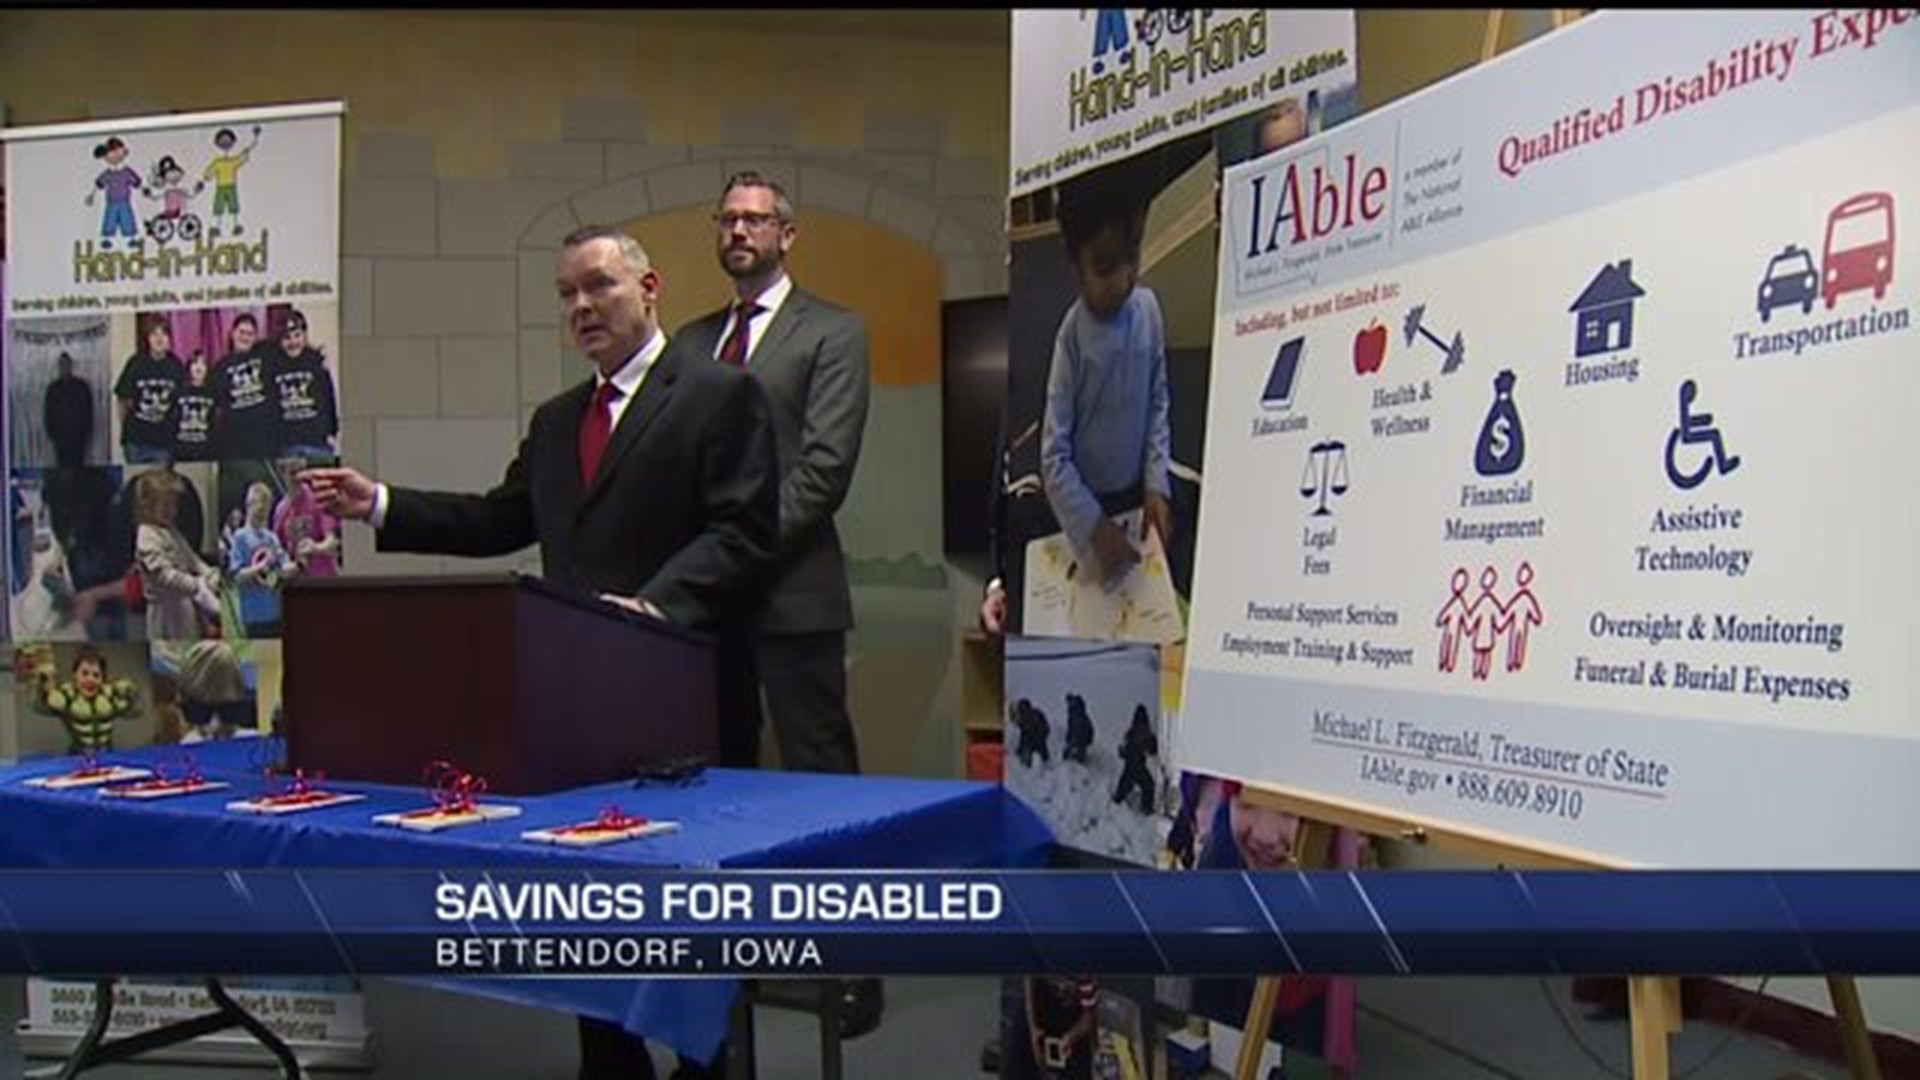 Program offered to help people with disabilities save money